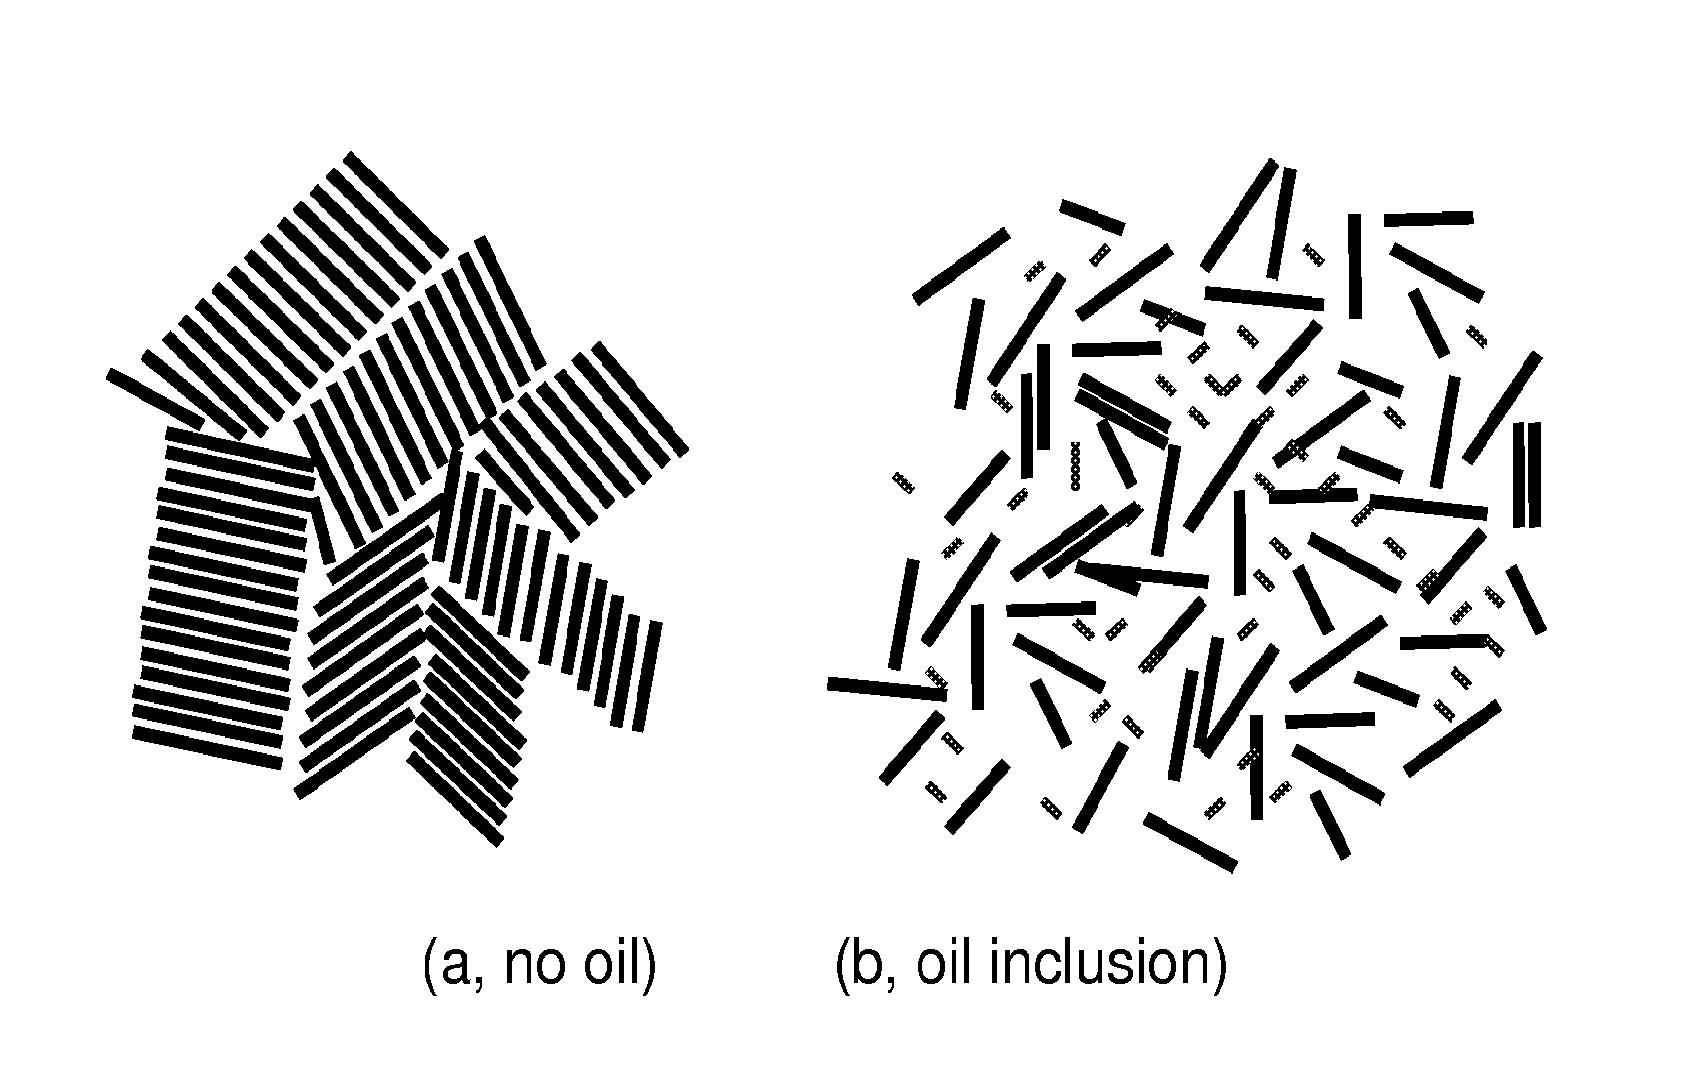 Polymer compositions, methods of making the same, and articles prepared from the same